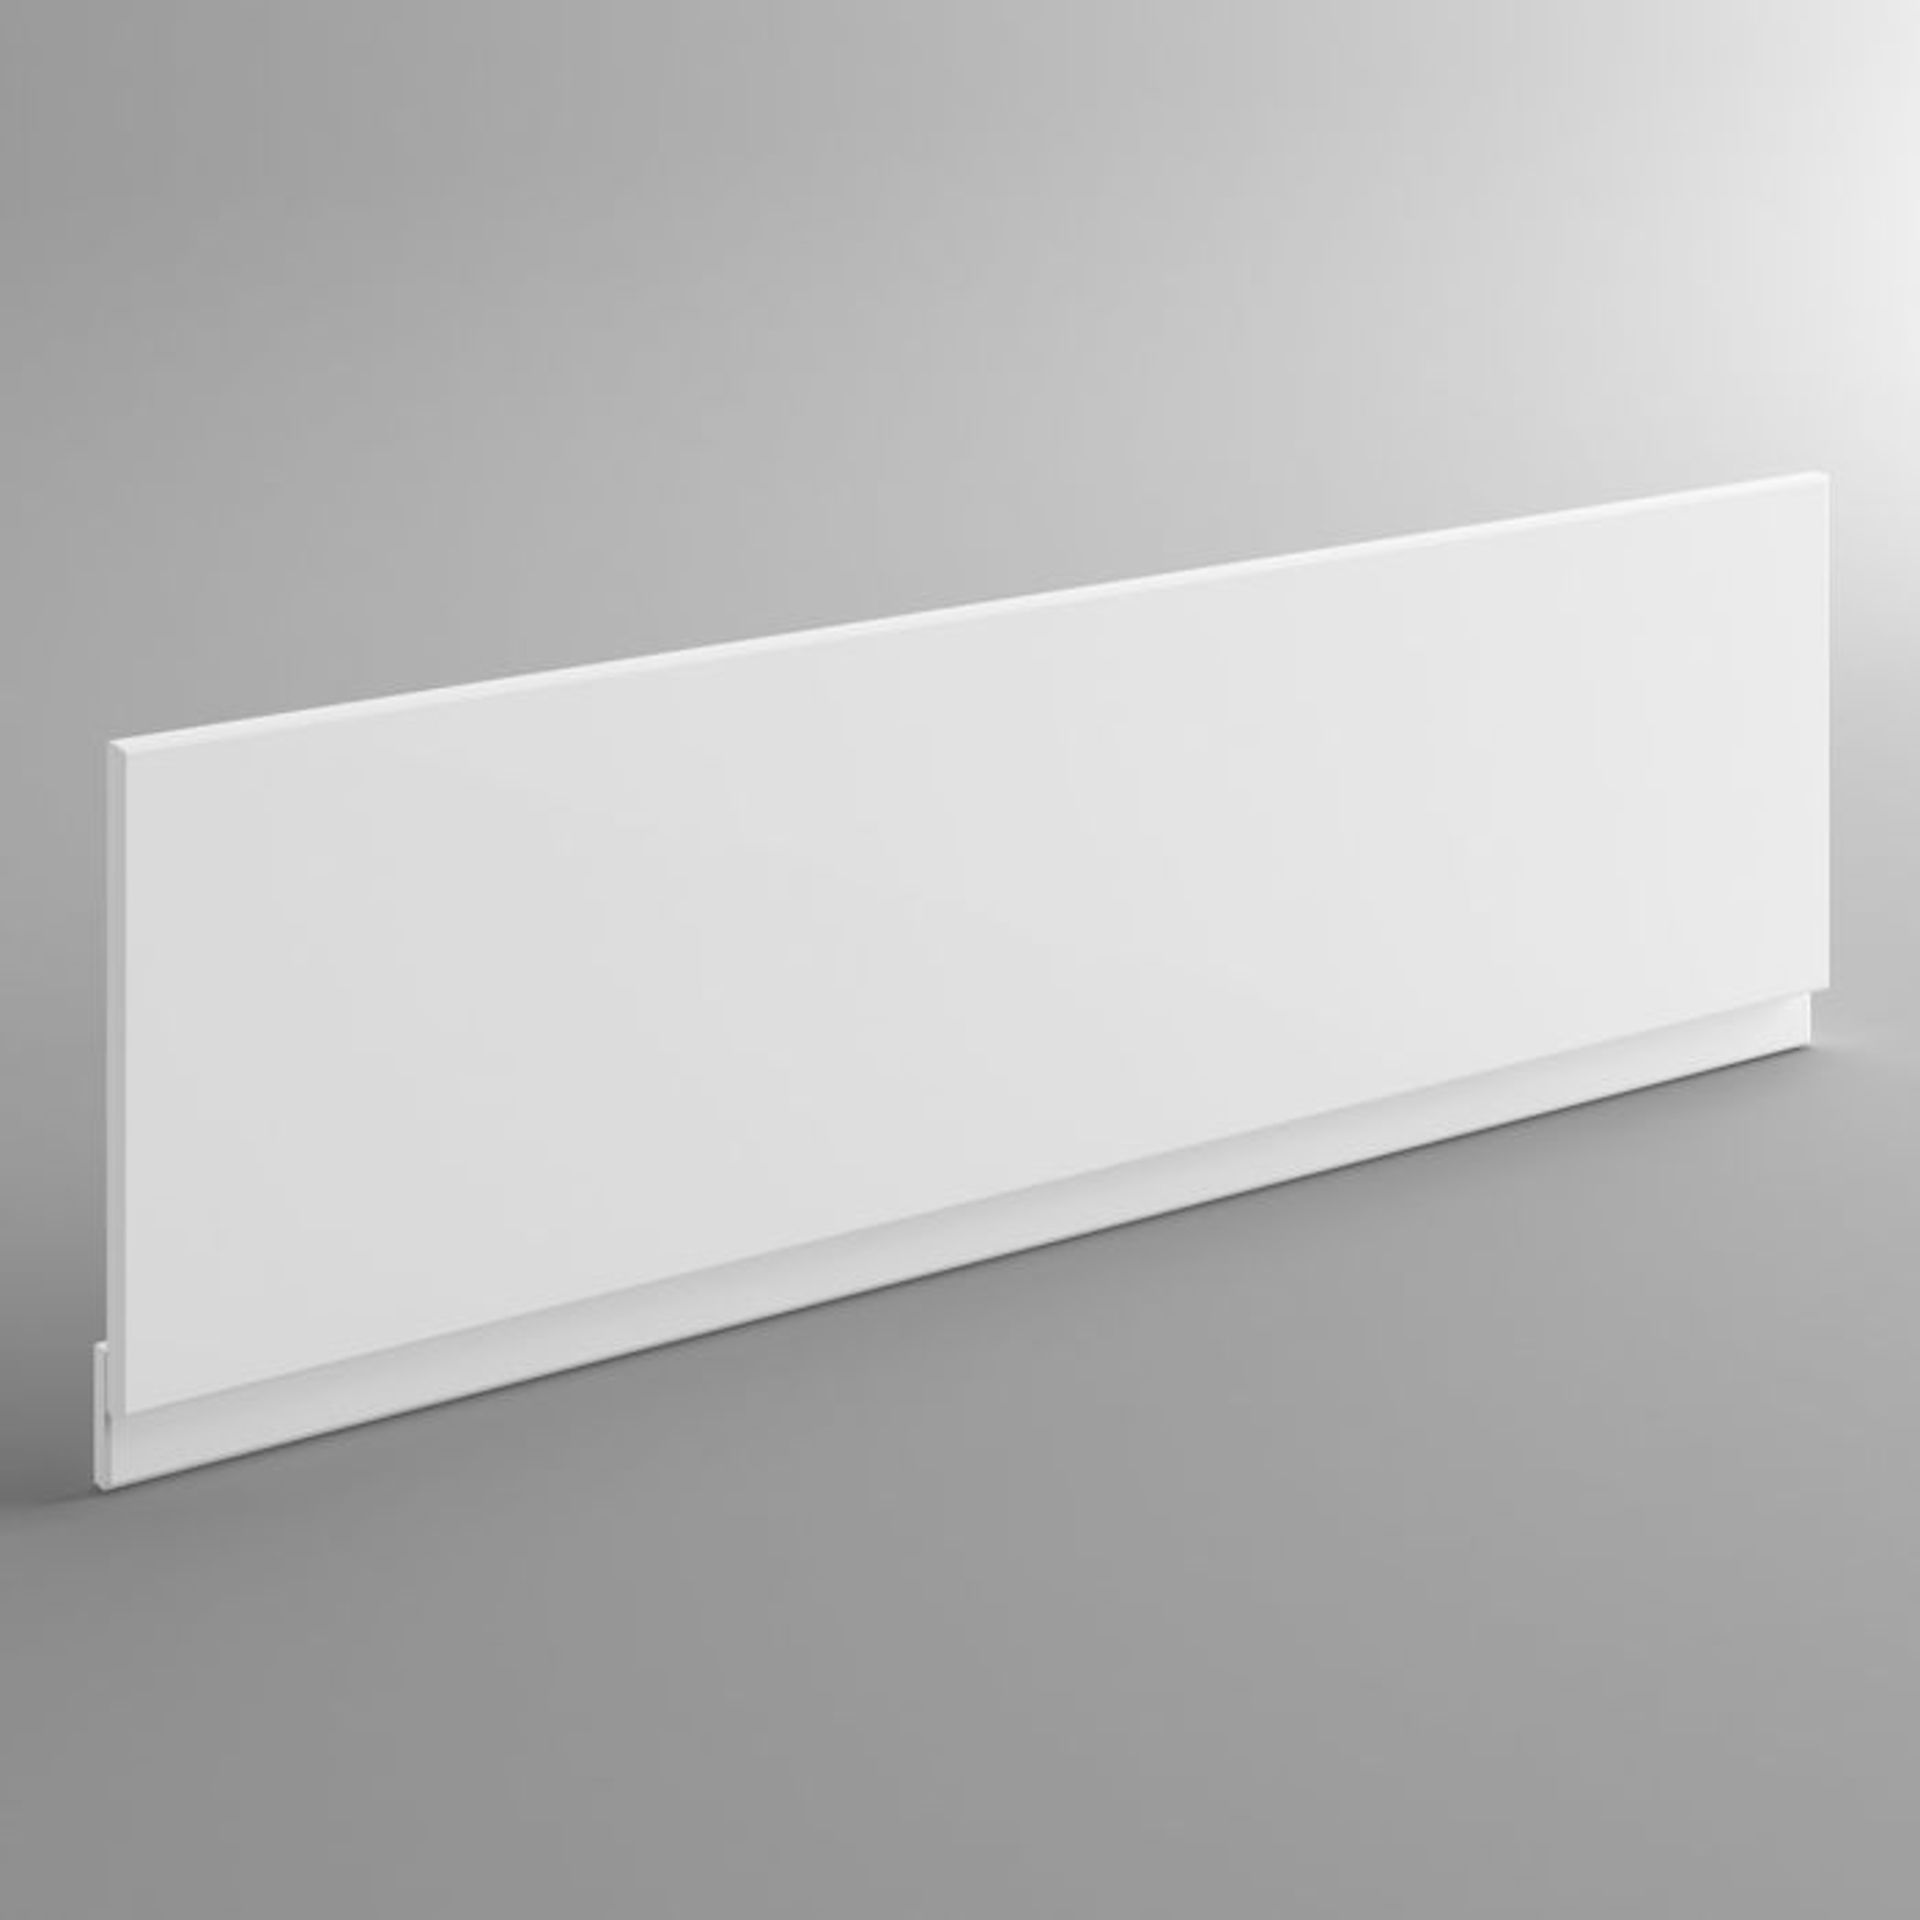 (S190) 1700mm MDF Bath Front Panel - Gloss White. RRP £79.99. 18mm thick durable MDF board - Bild 2 aus 2